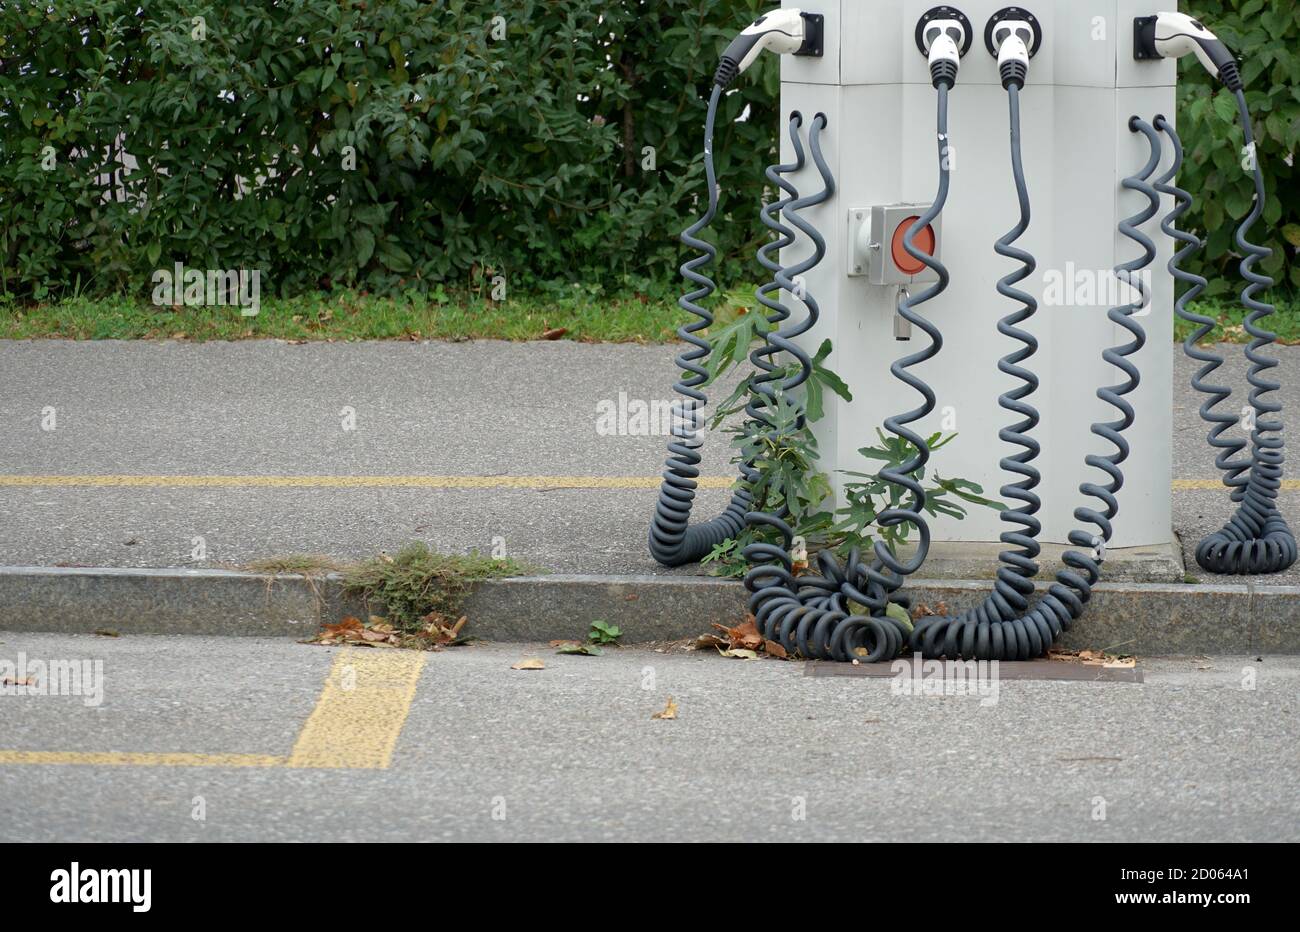 EV charging station for four electric or plug-in hybrid cars on the street. Stock Photo